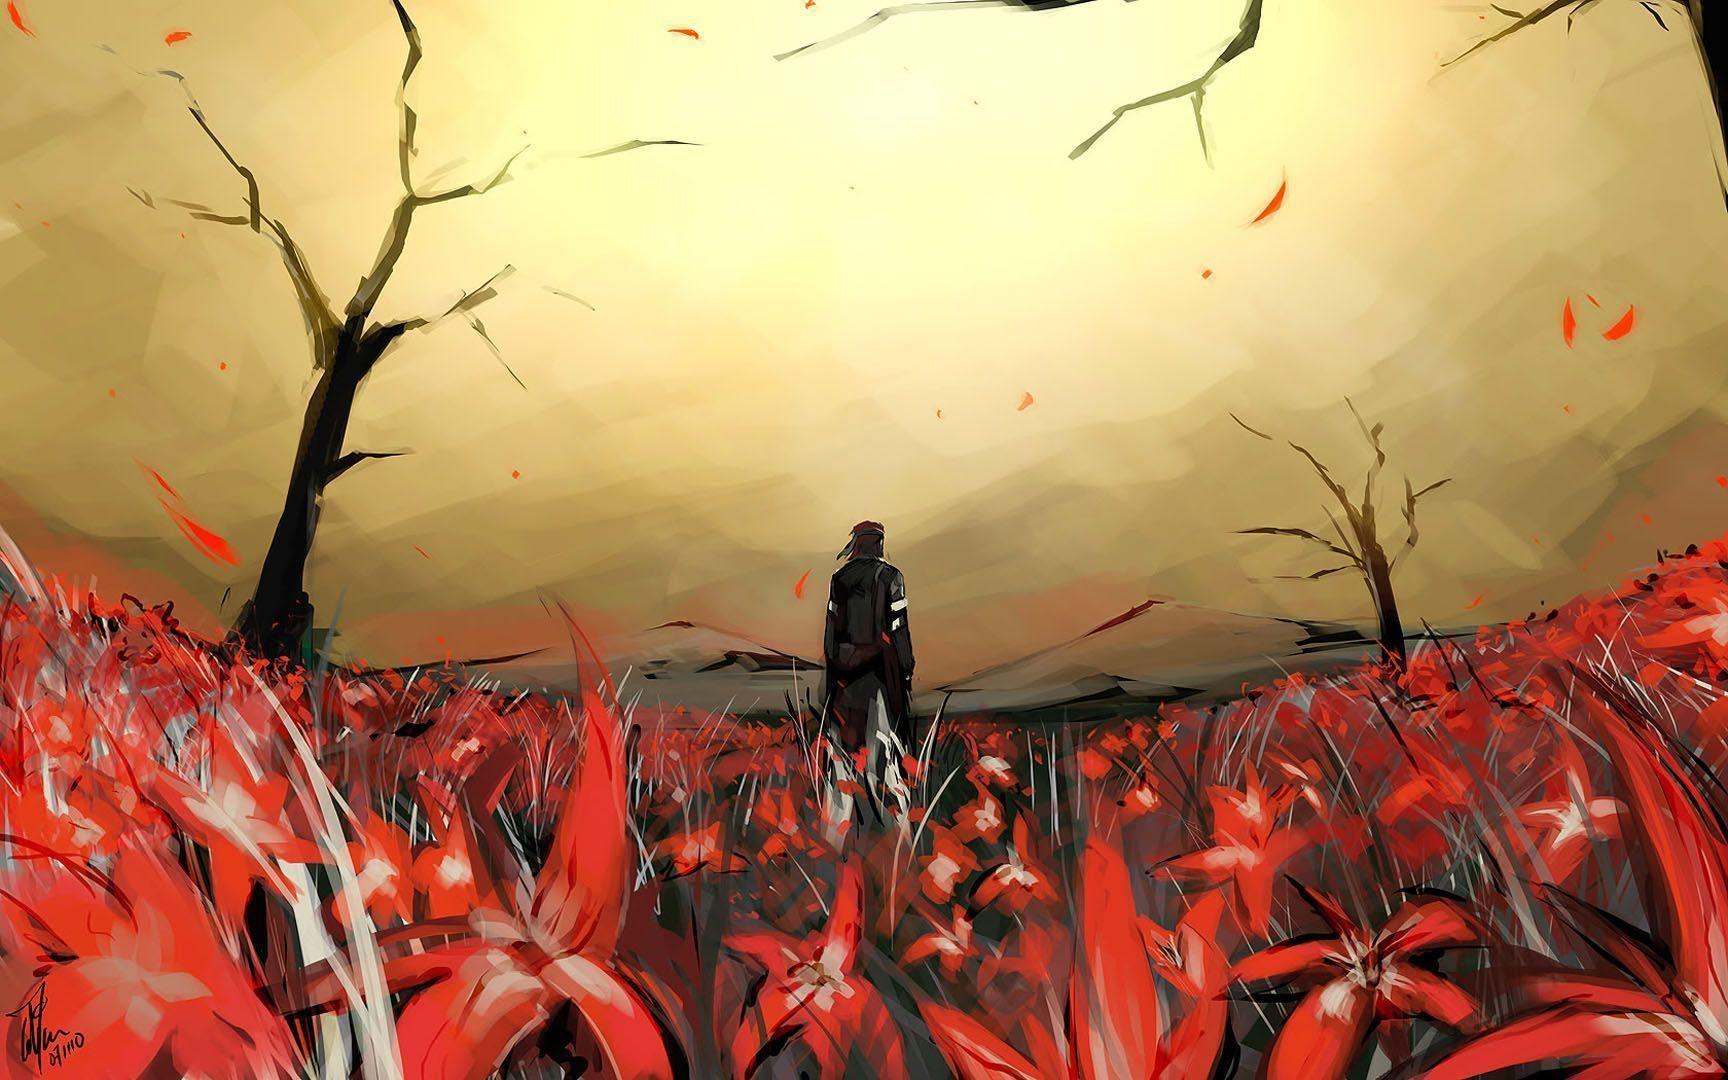 Surrounded By Red Flowers Rpg Games Wallpaper Image